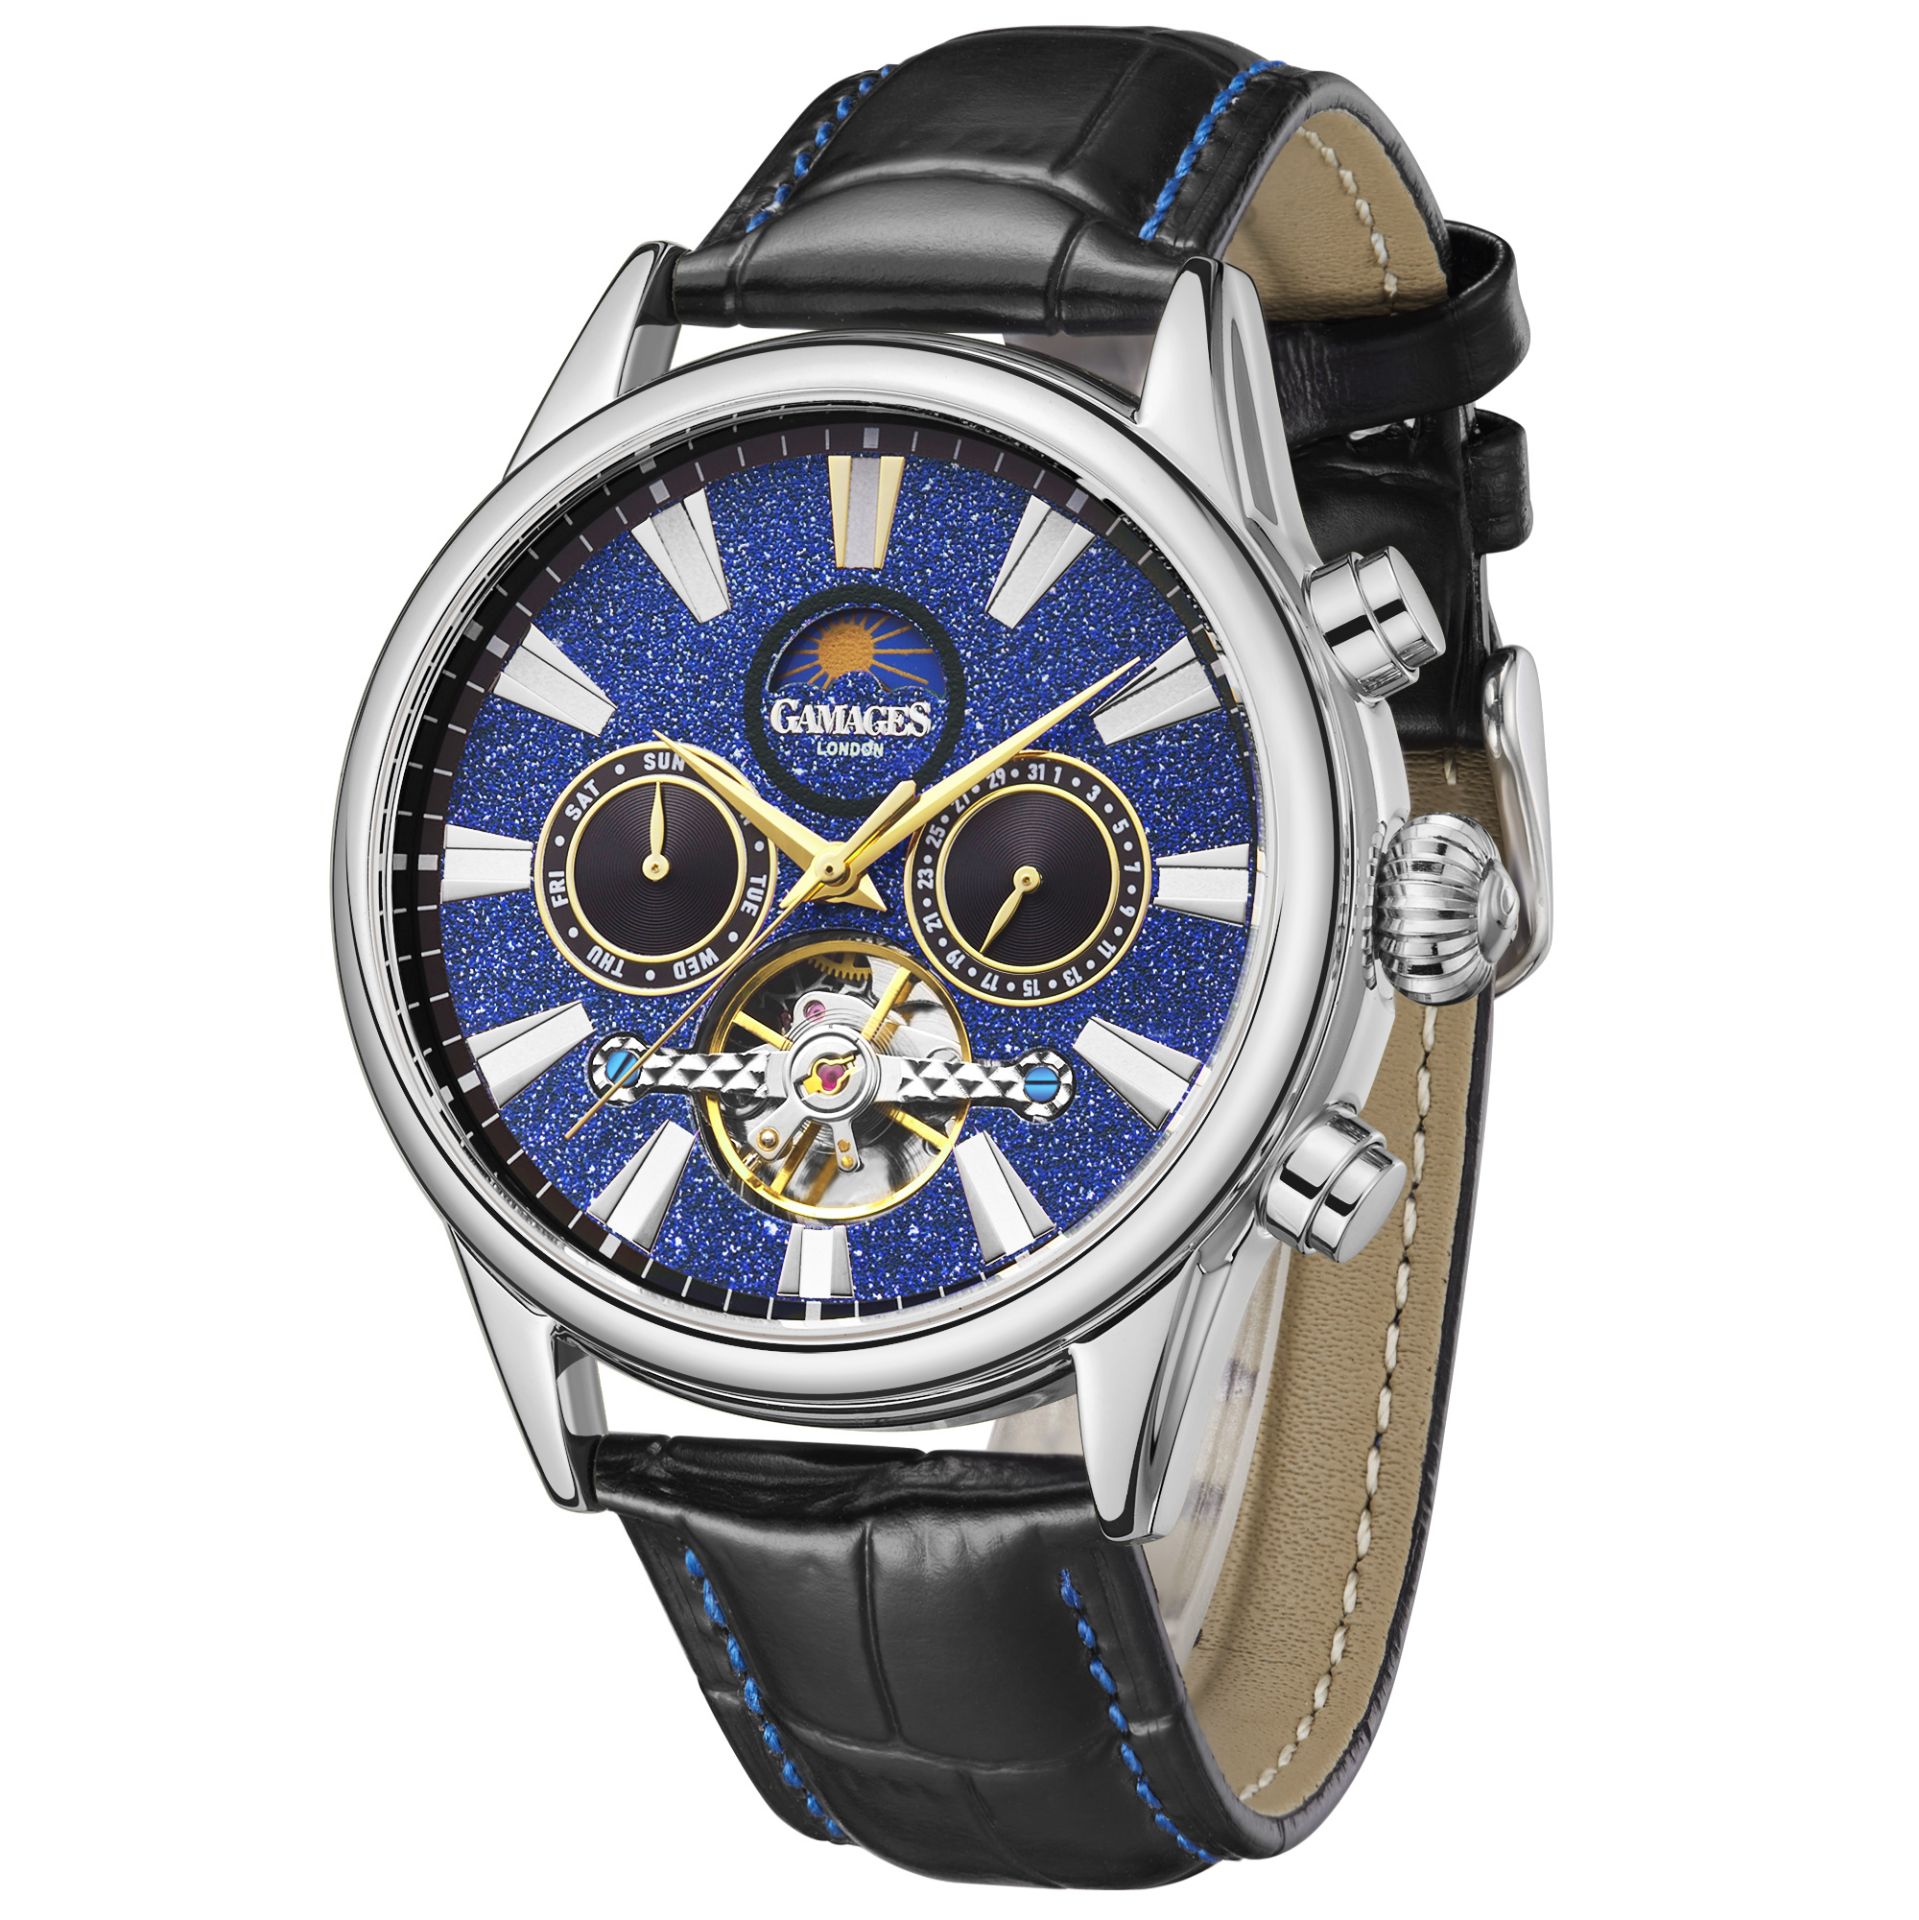 Gamages of London Hand Assembled Telescope Automatic Silver Navy- 5 Year Warranty and Free Delive... - Image 4 of 5